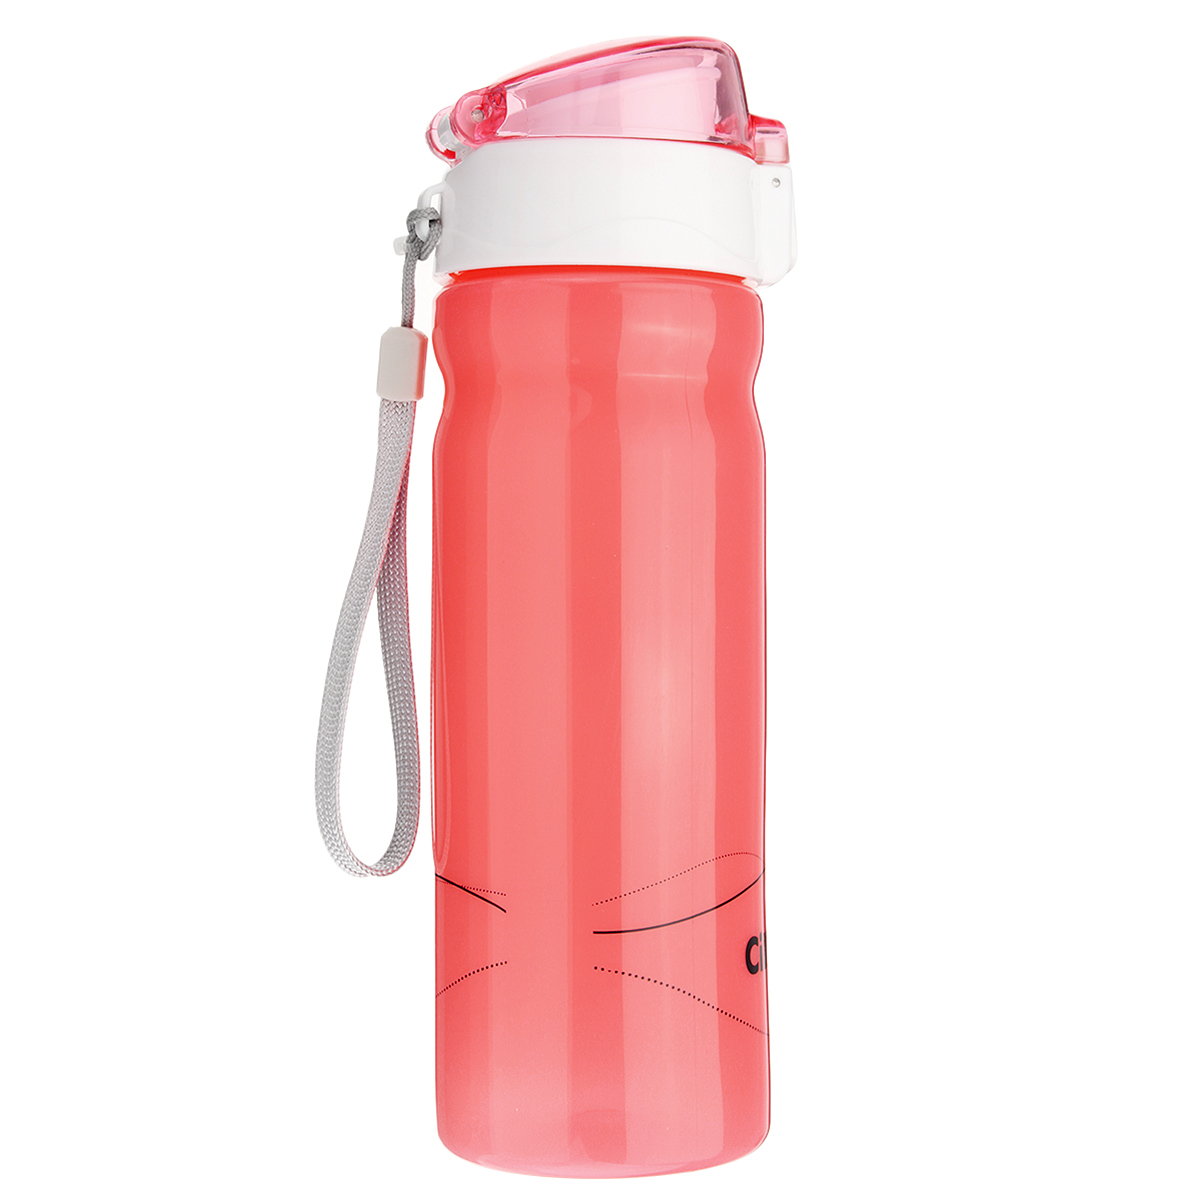 600ml20oz-High-quality-Food-Grade-Water-Bottle-for-long-hikes-trekking-hot-yoga-class-long-load-trip-1523049-10